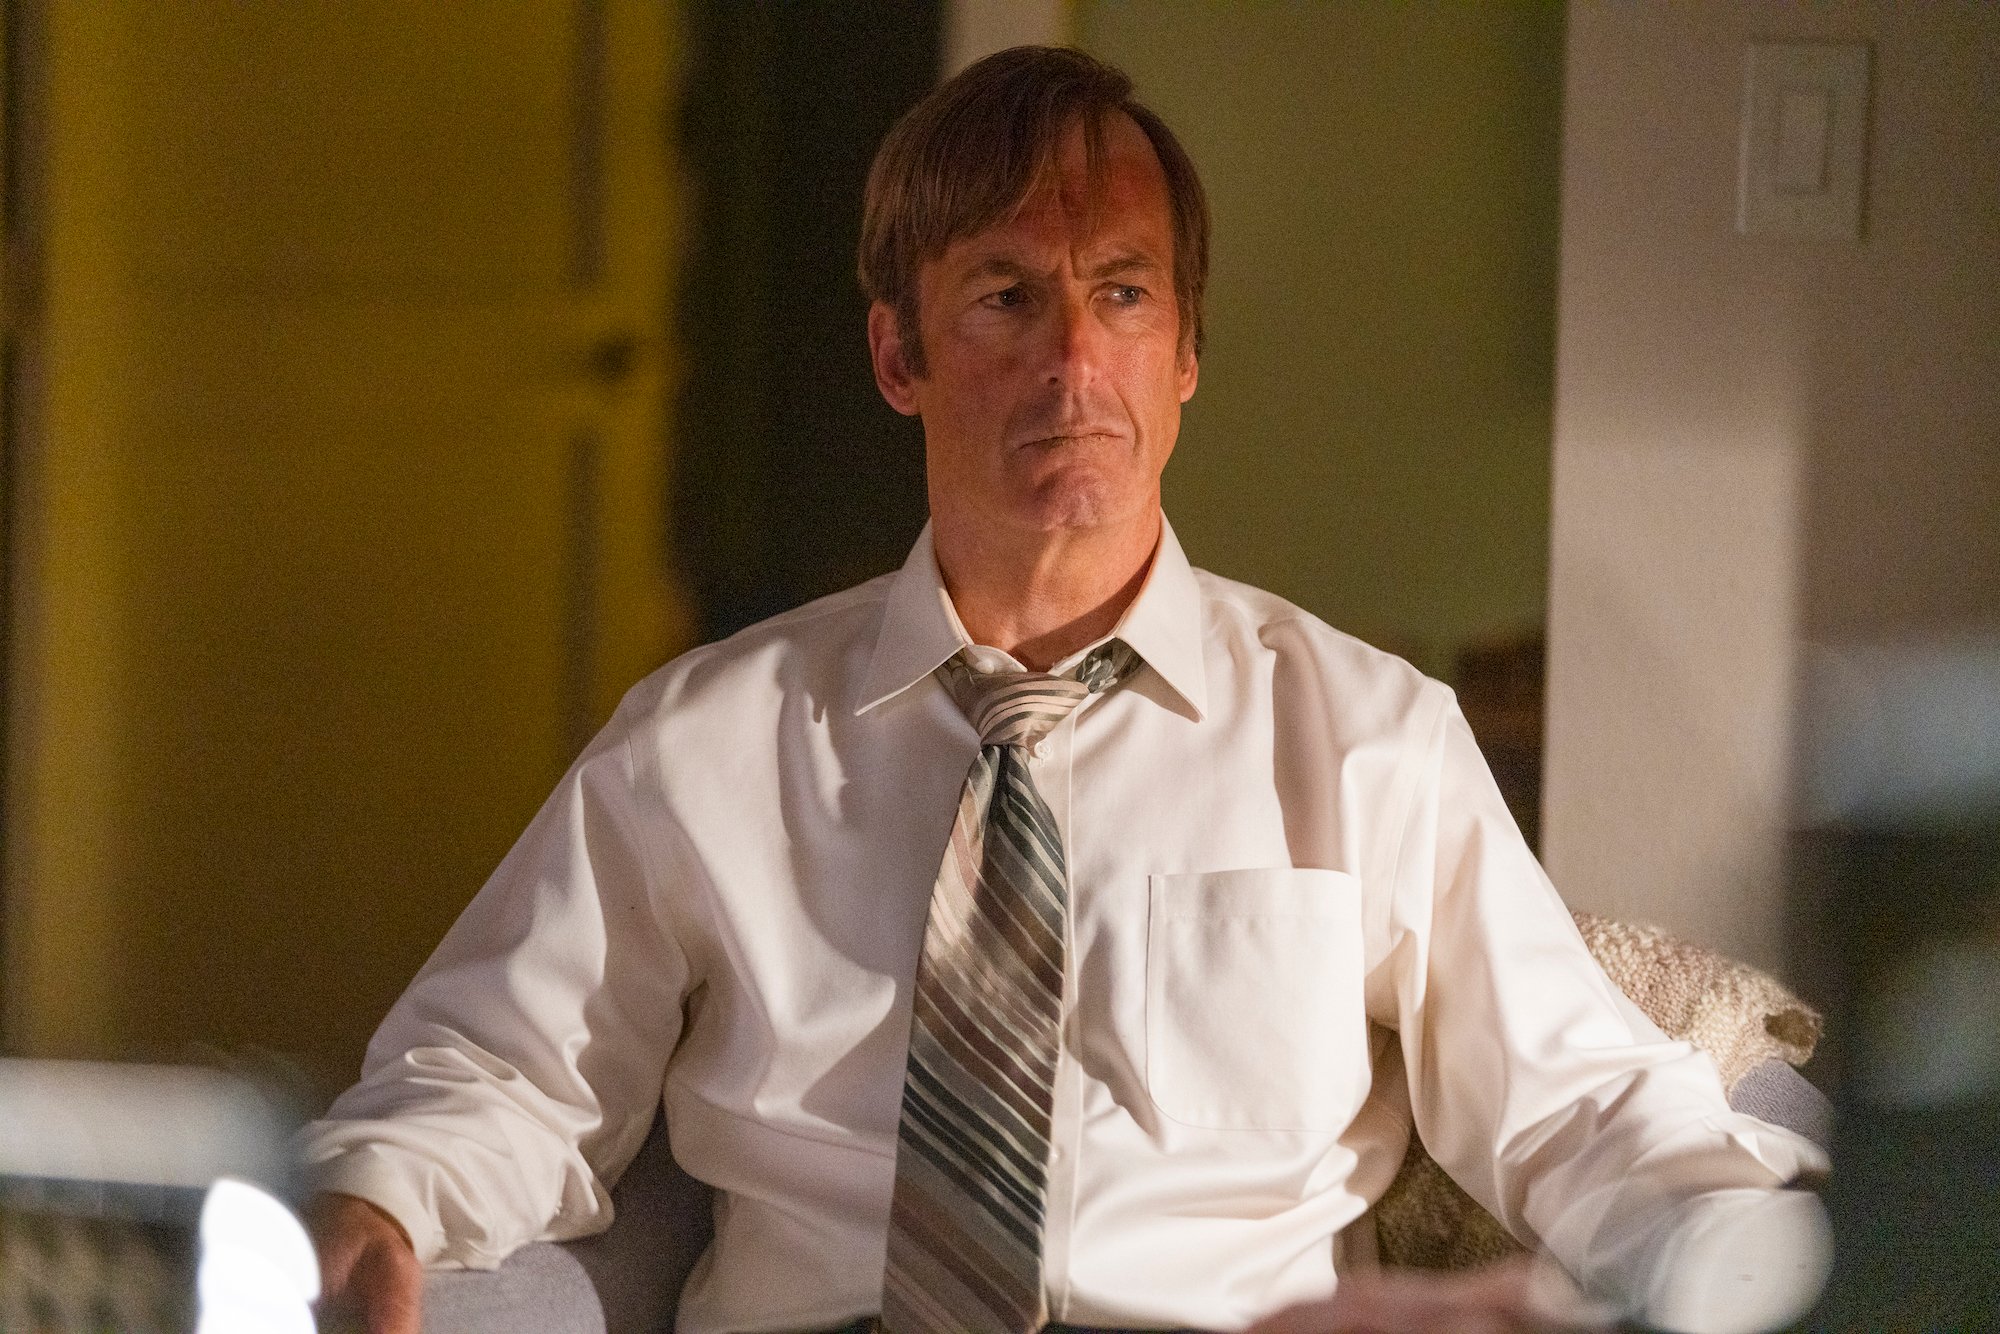 Better Call Saul: Bob Odenkirk sits in a chair